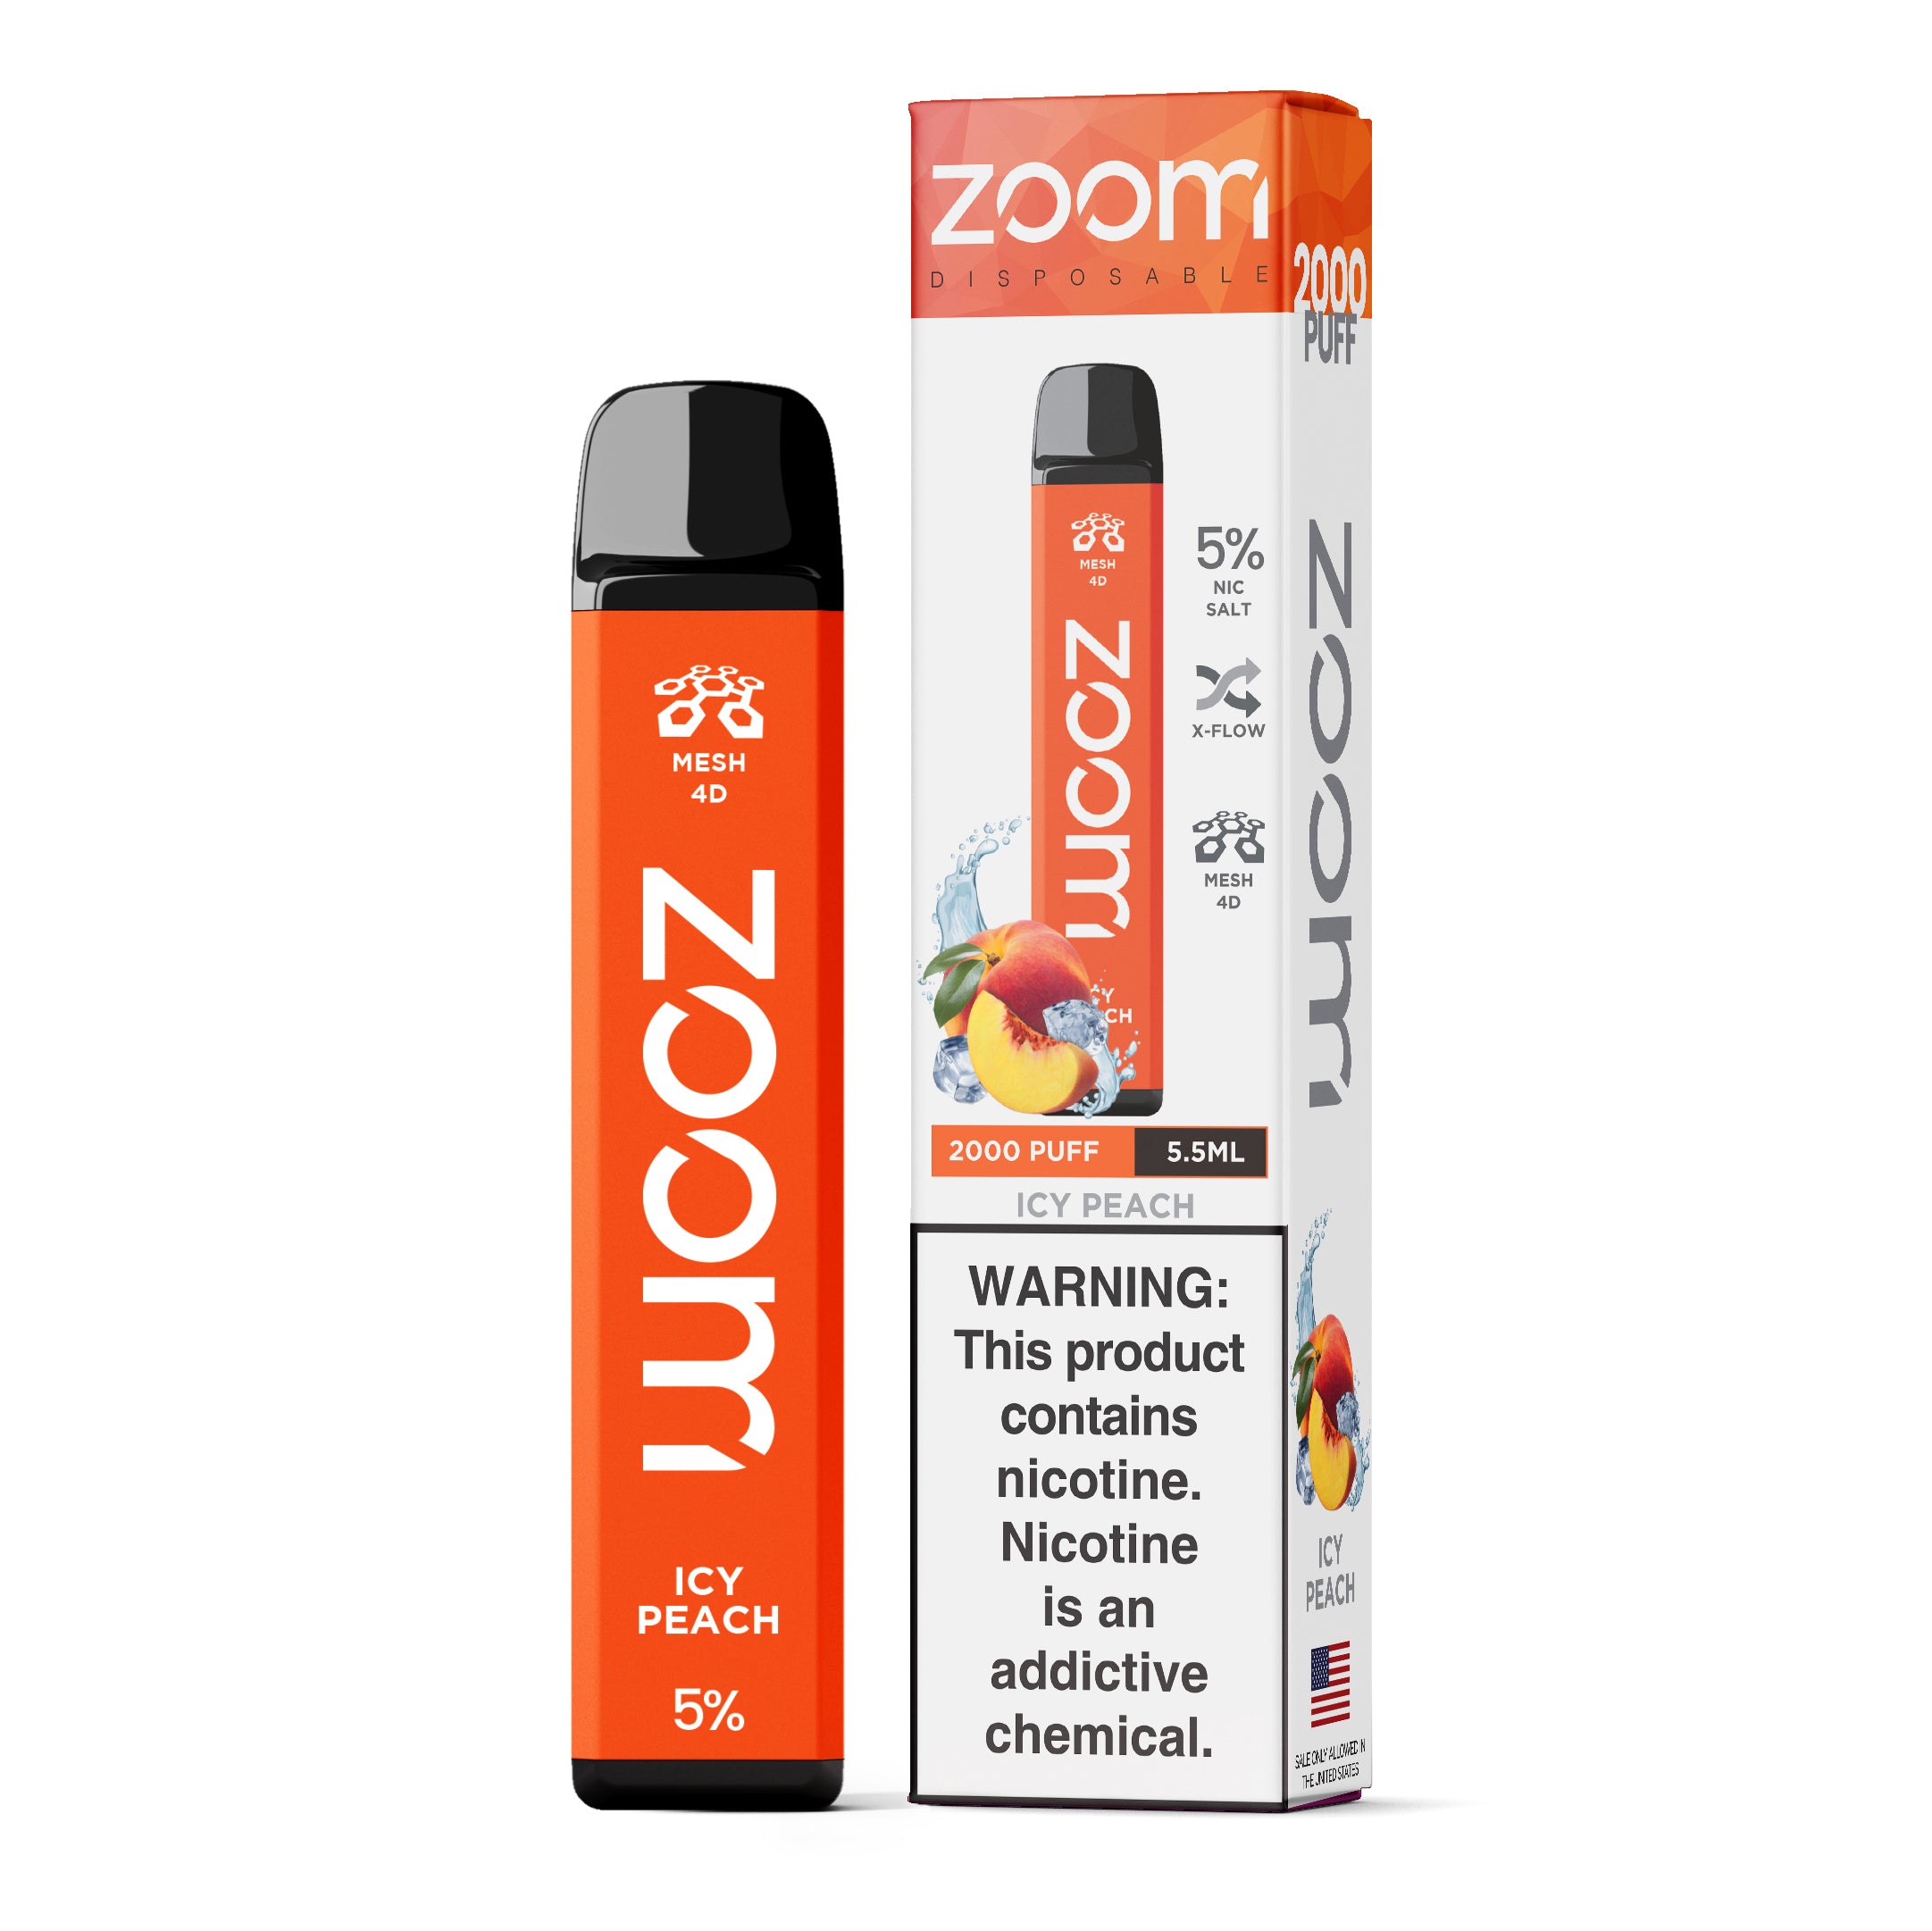 Zoom Disposable | 2000 Puffs | 5.5mL Icy Peach with packaging